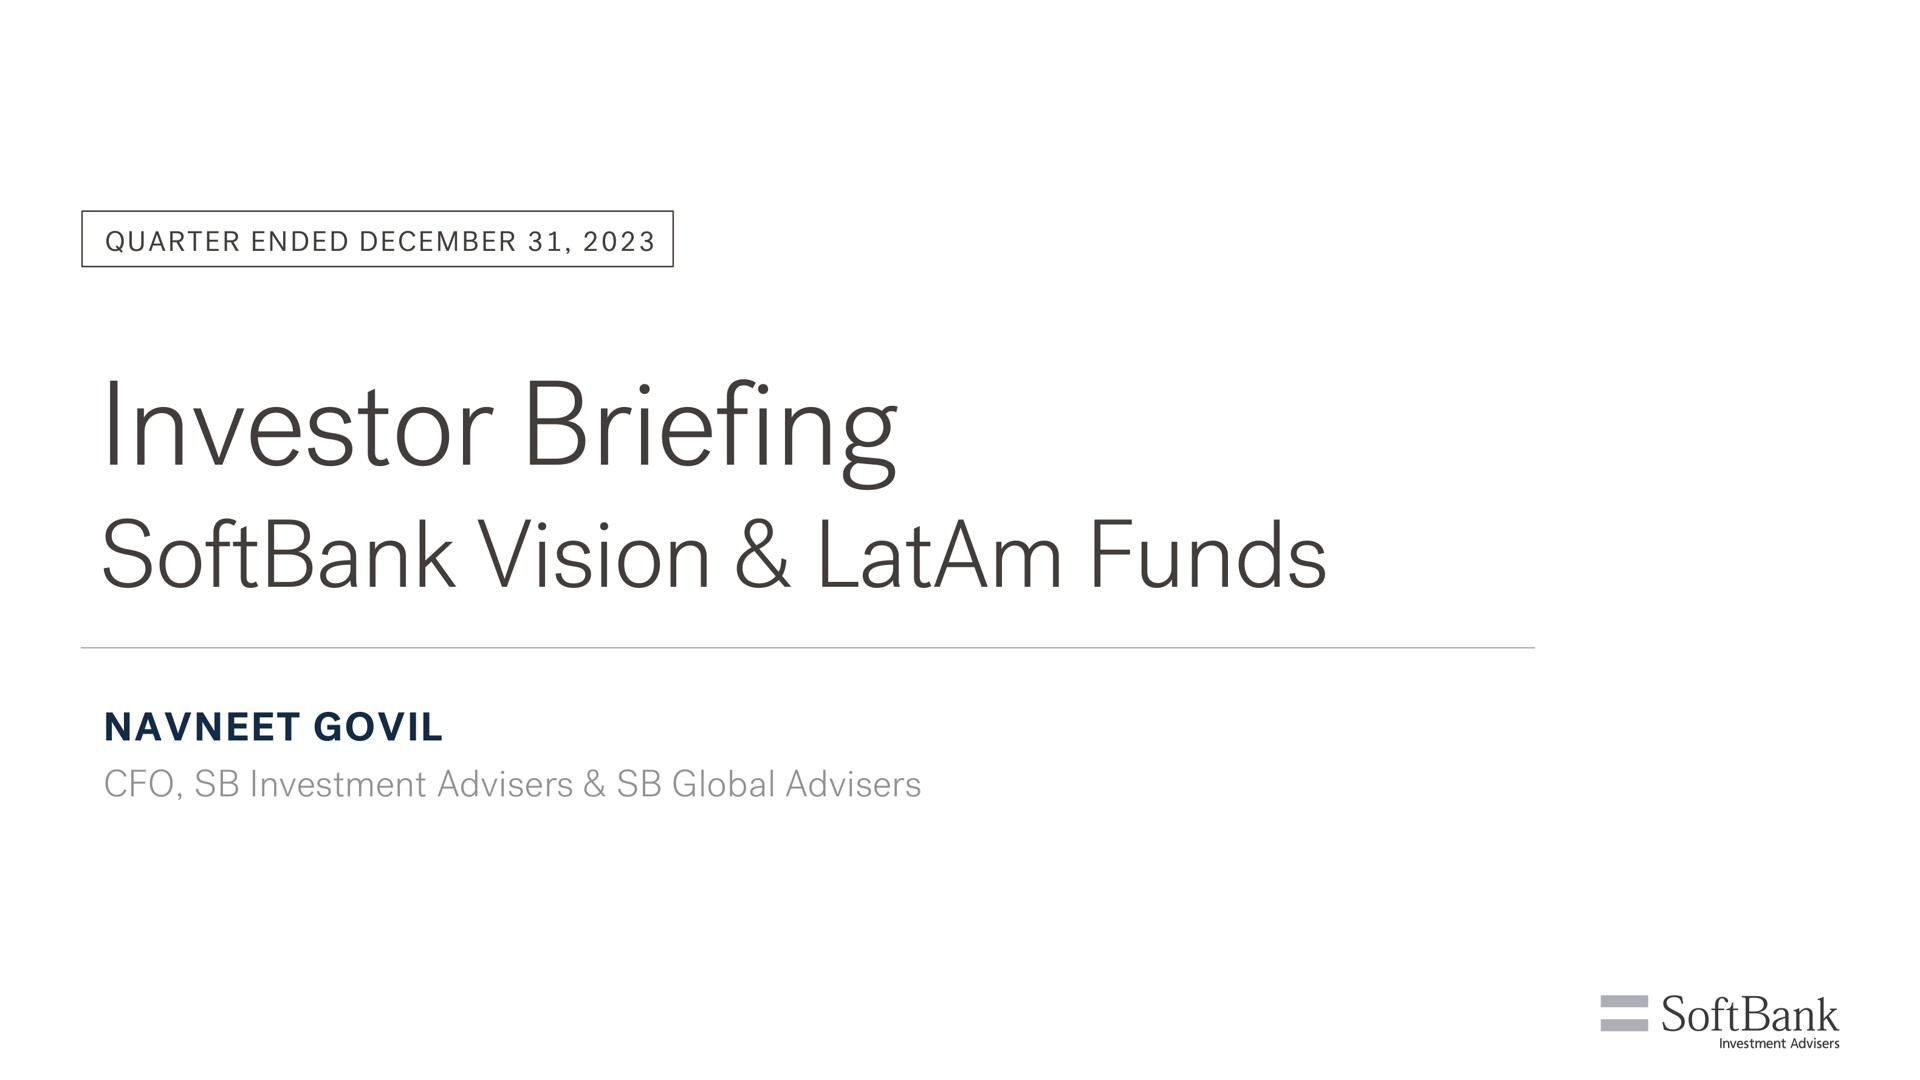 investor briefing vision funds investment advisers global advisers | SoftBank